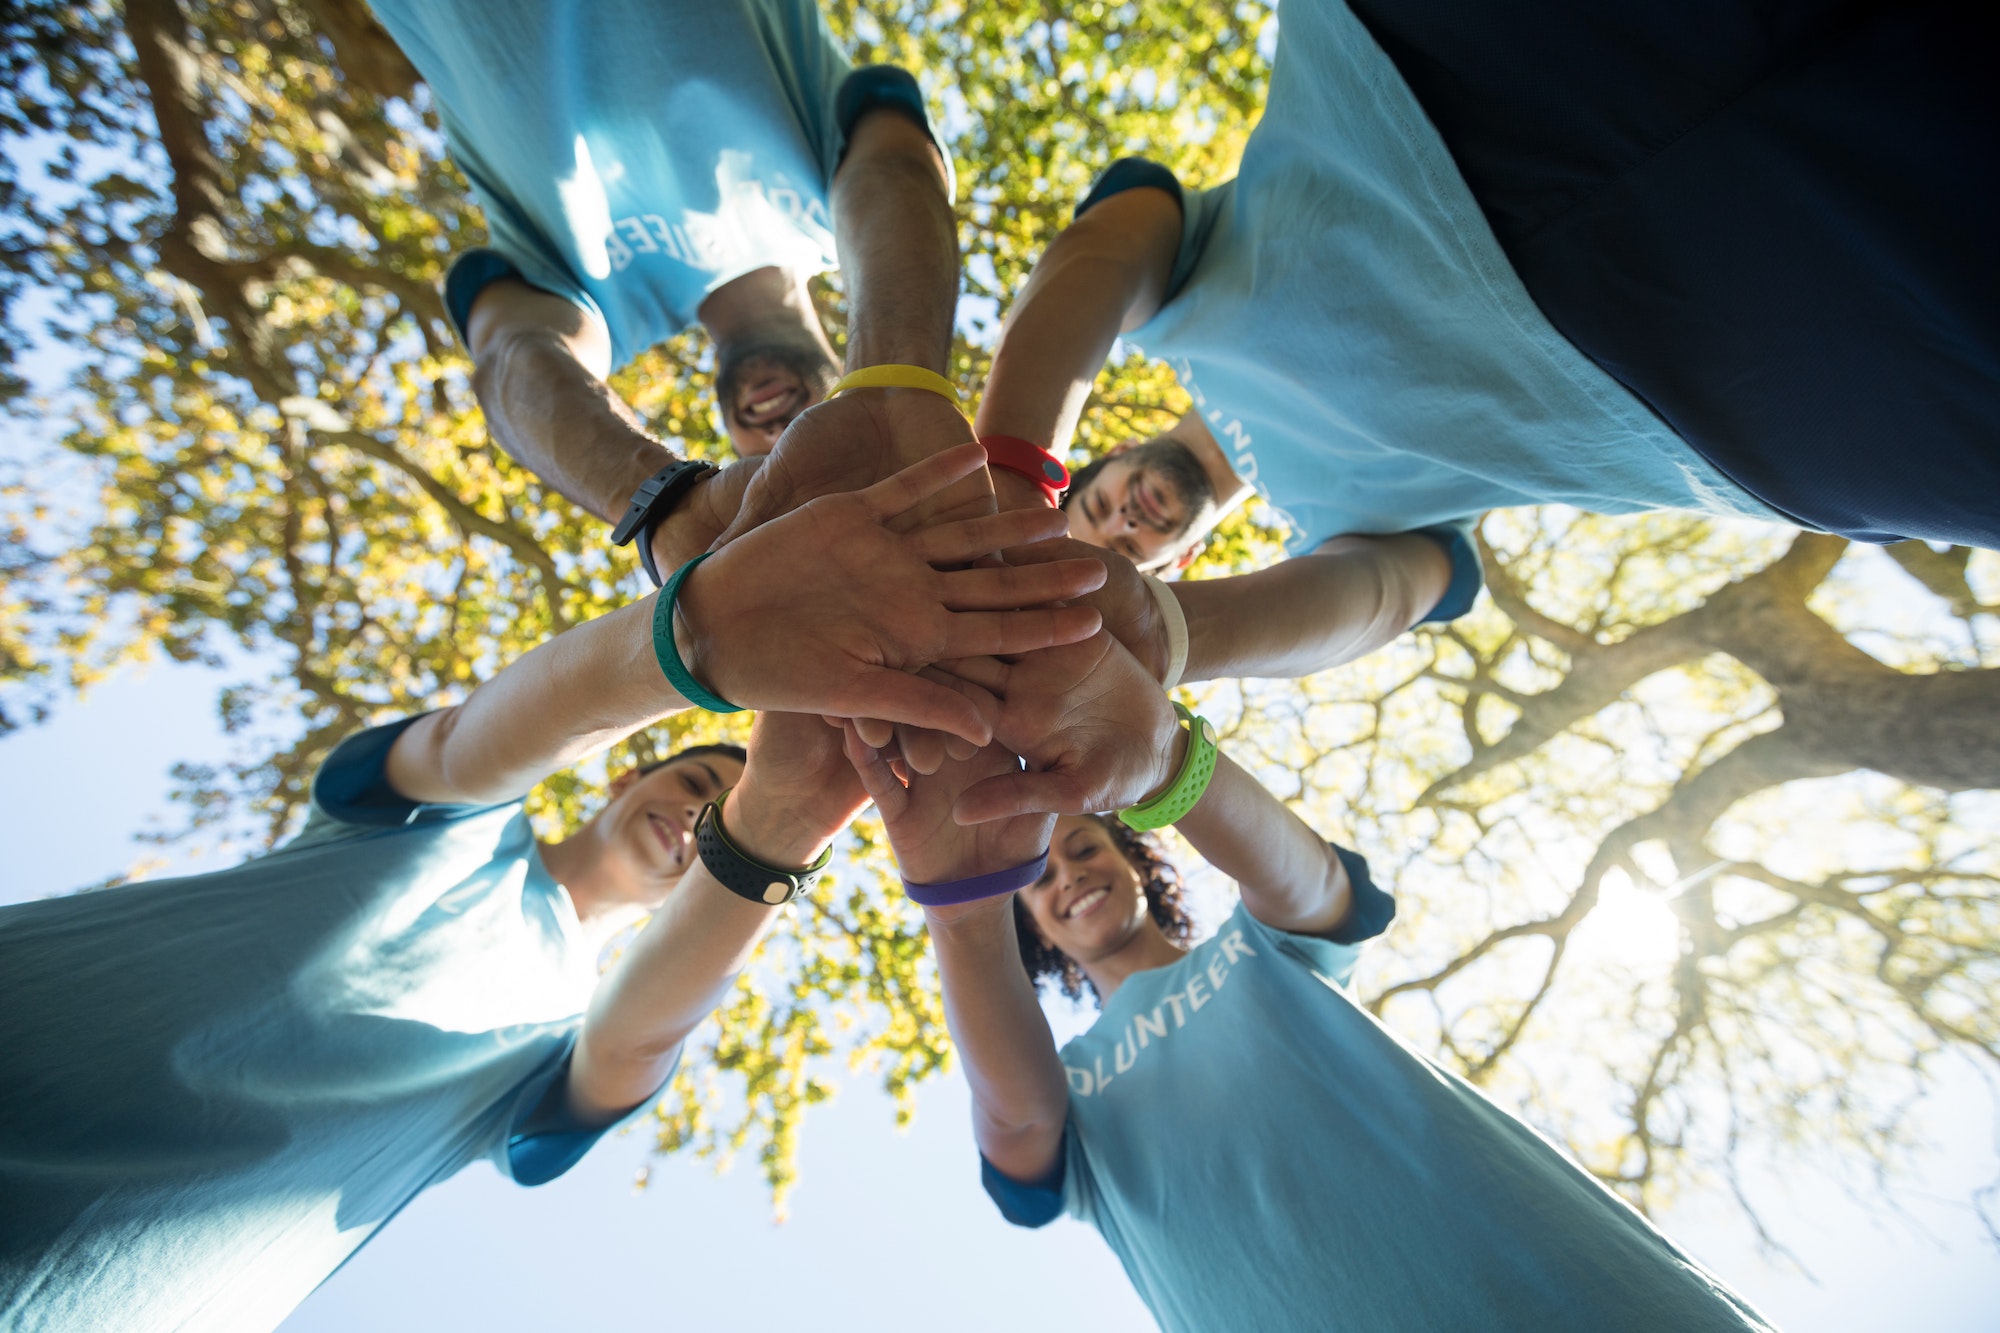 Volunteers forming a hand stack in the park